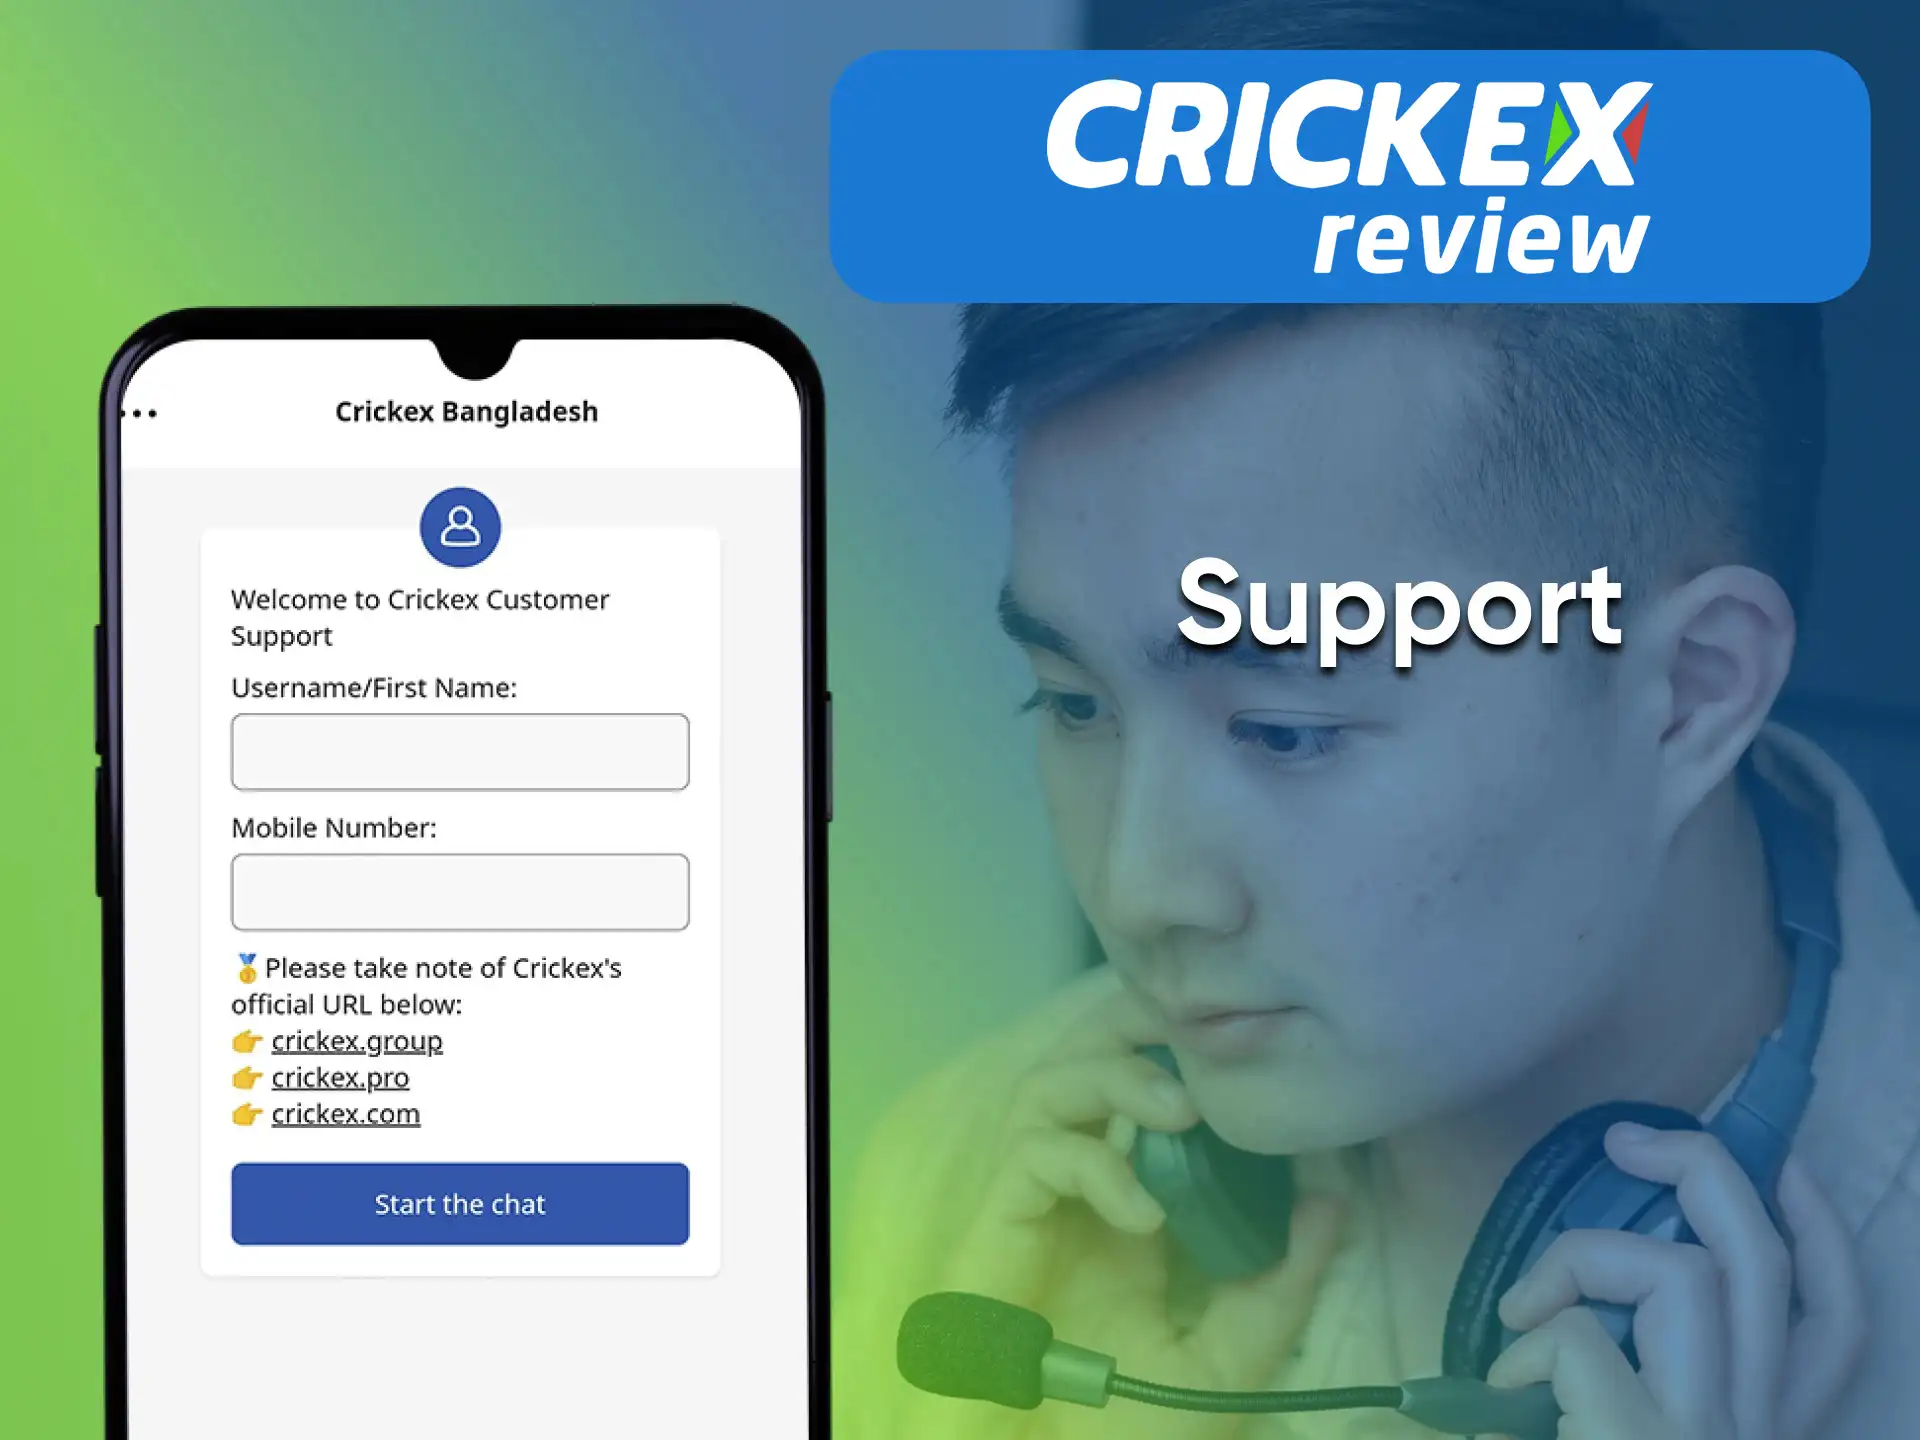 If you encounter any problems with the application, you can contact Crickex technical support.